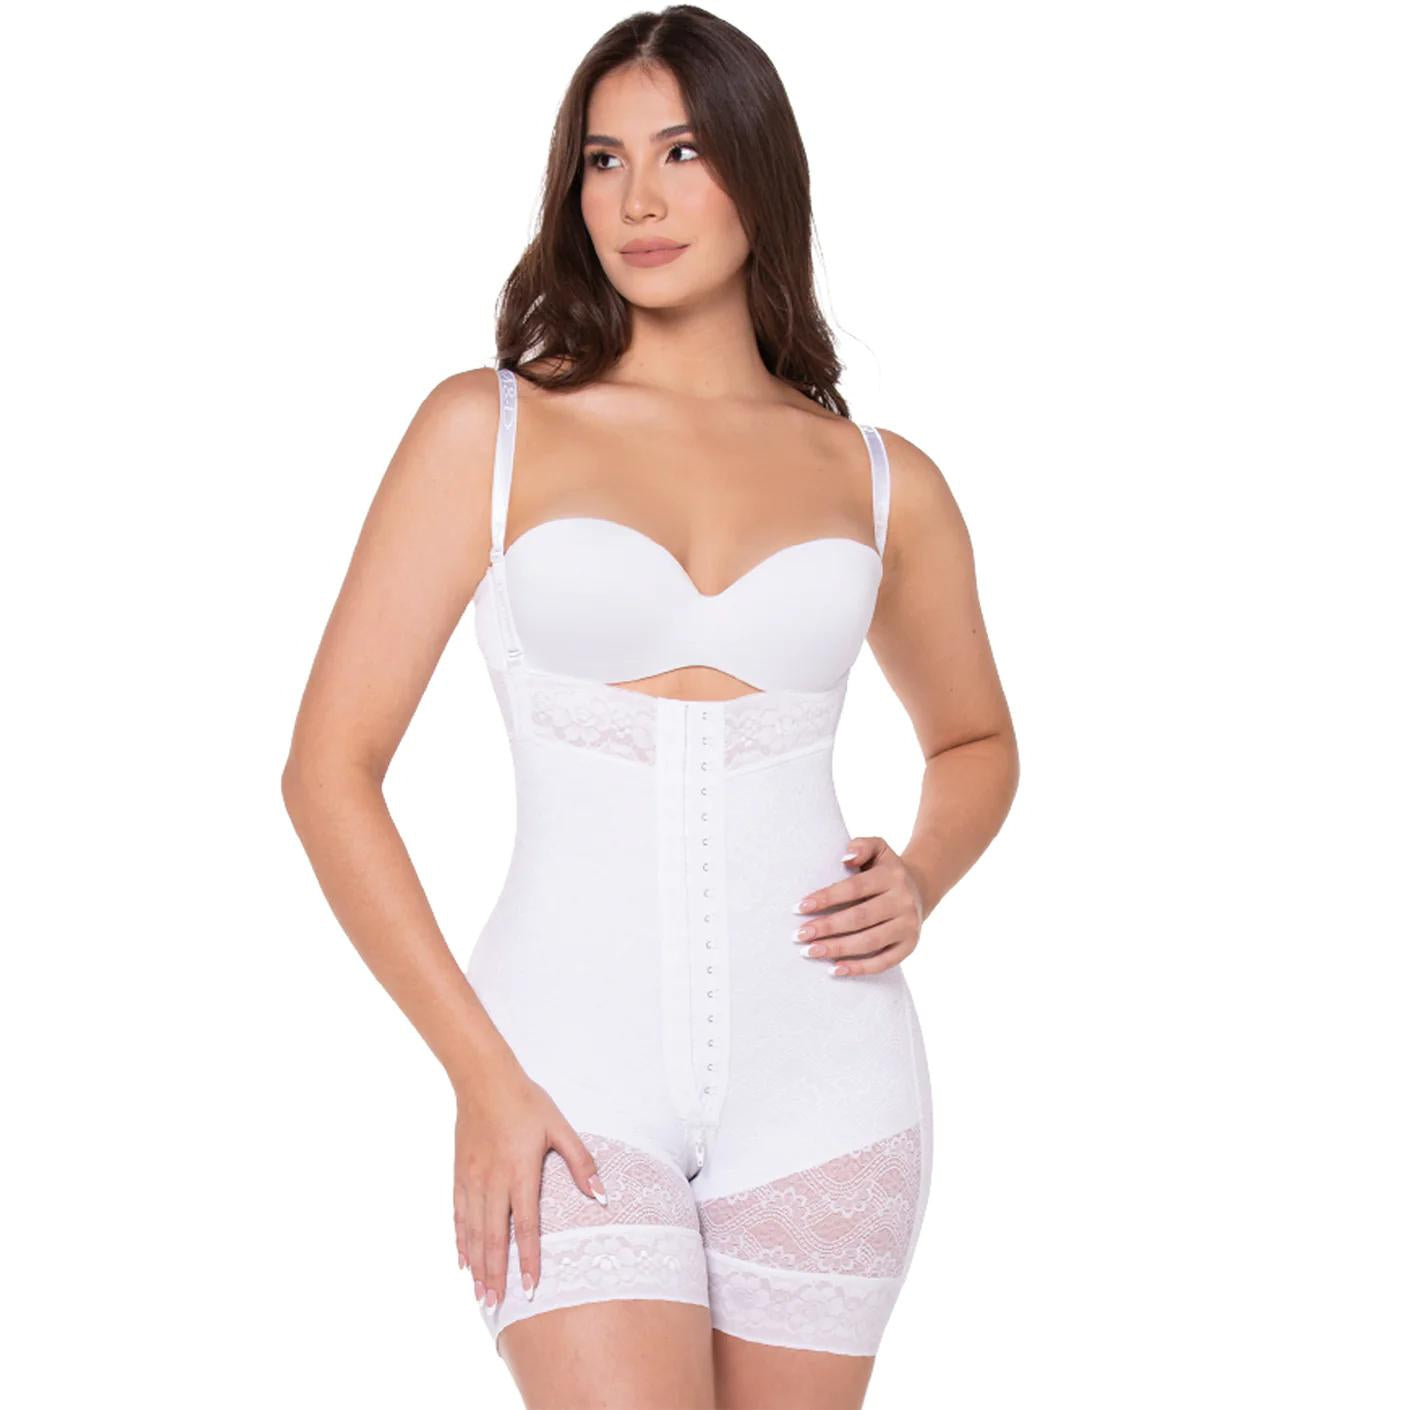 Colombian Shapewear: All you need to know about bust design and